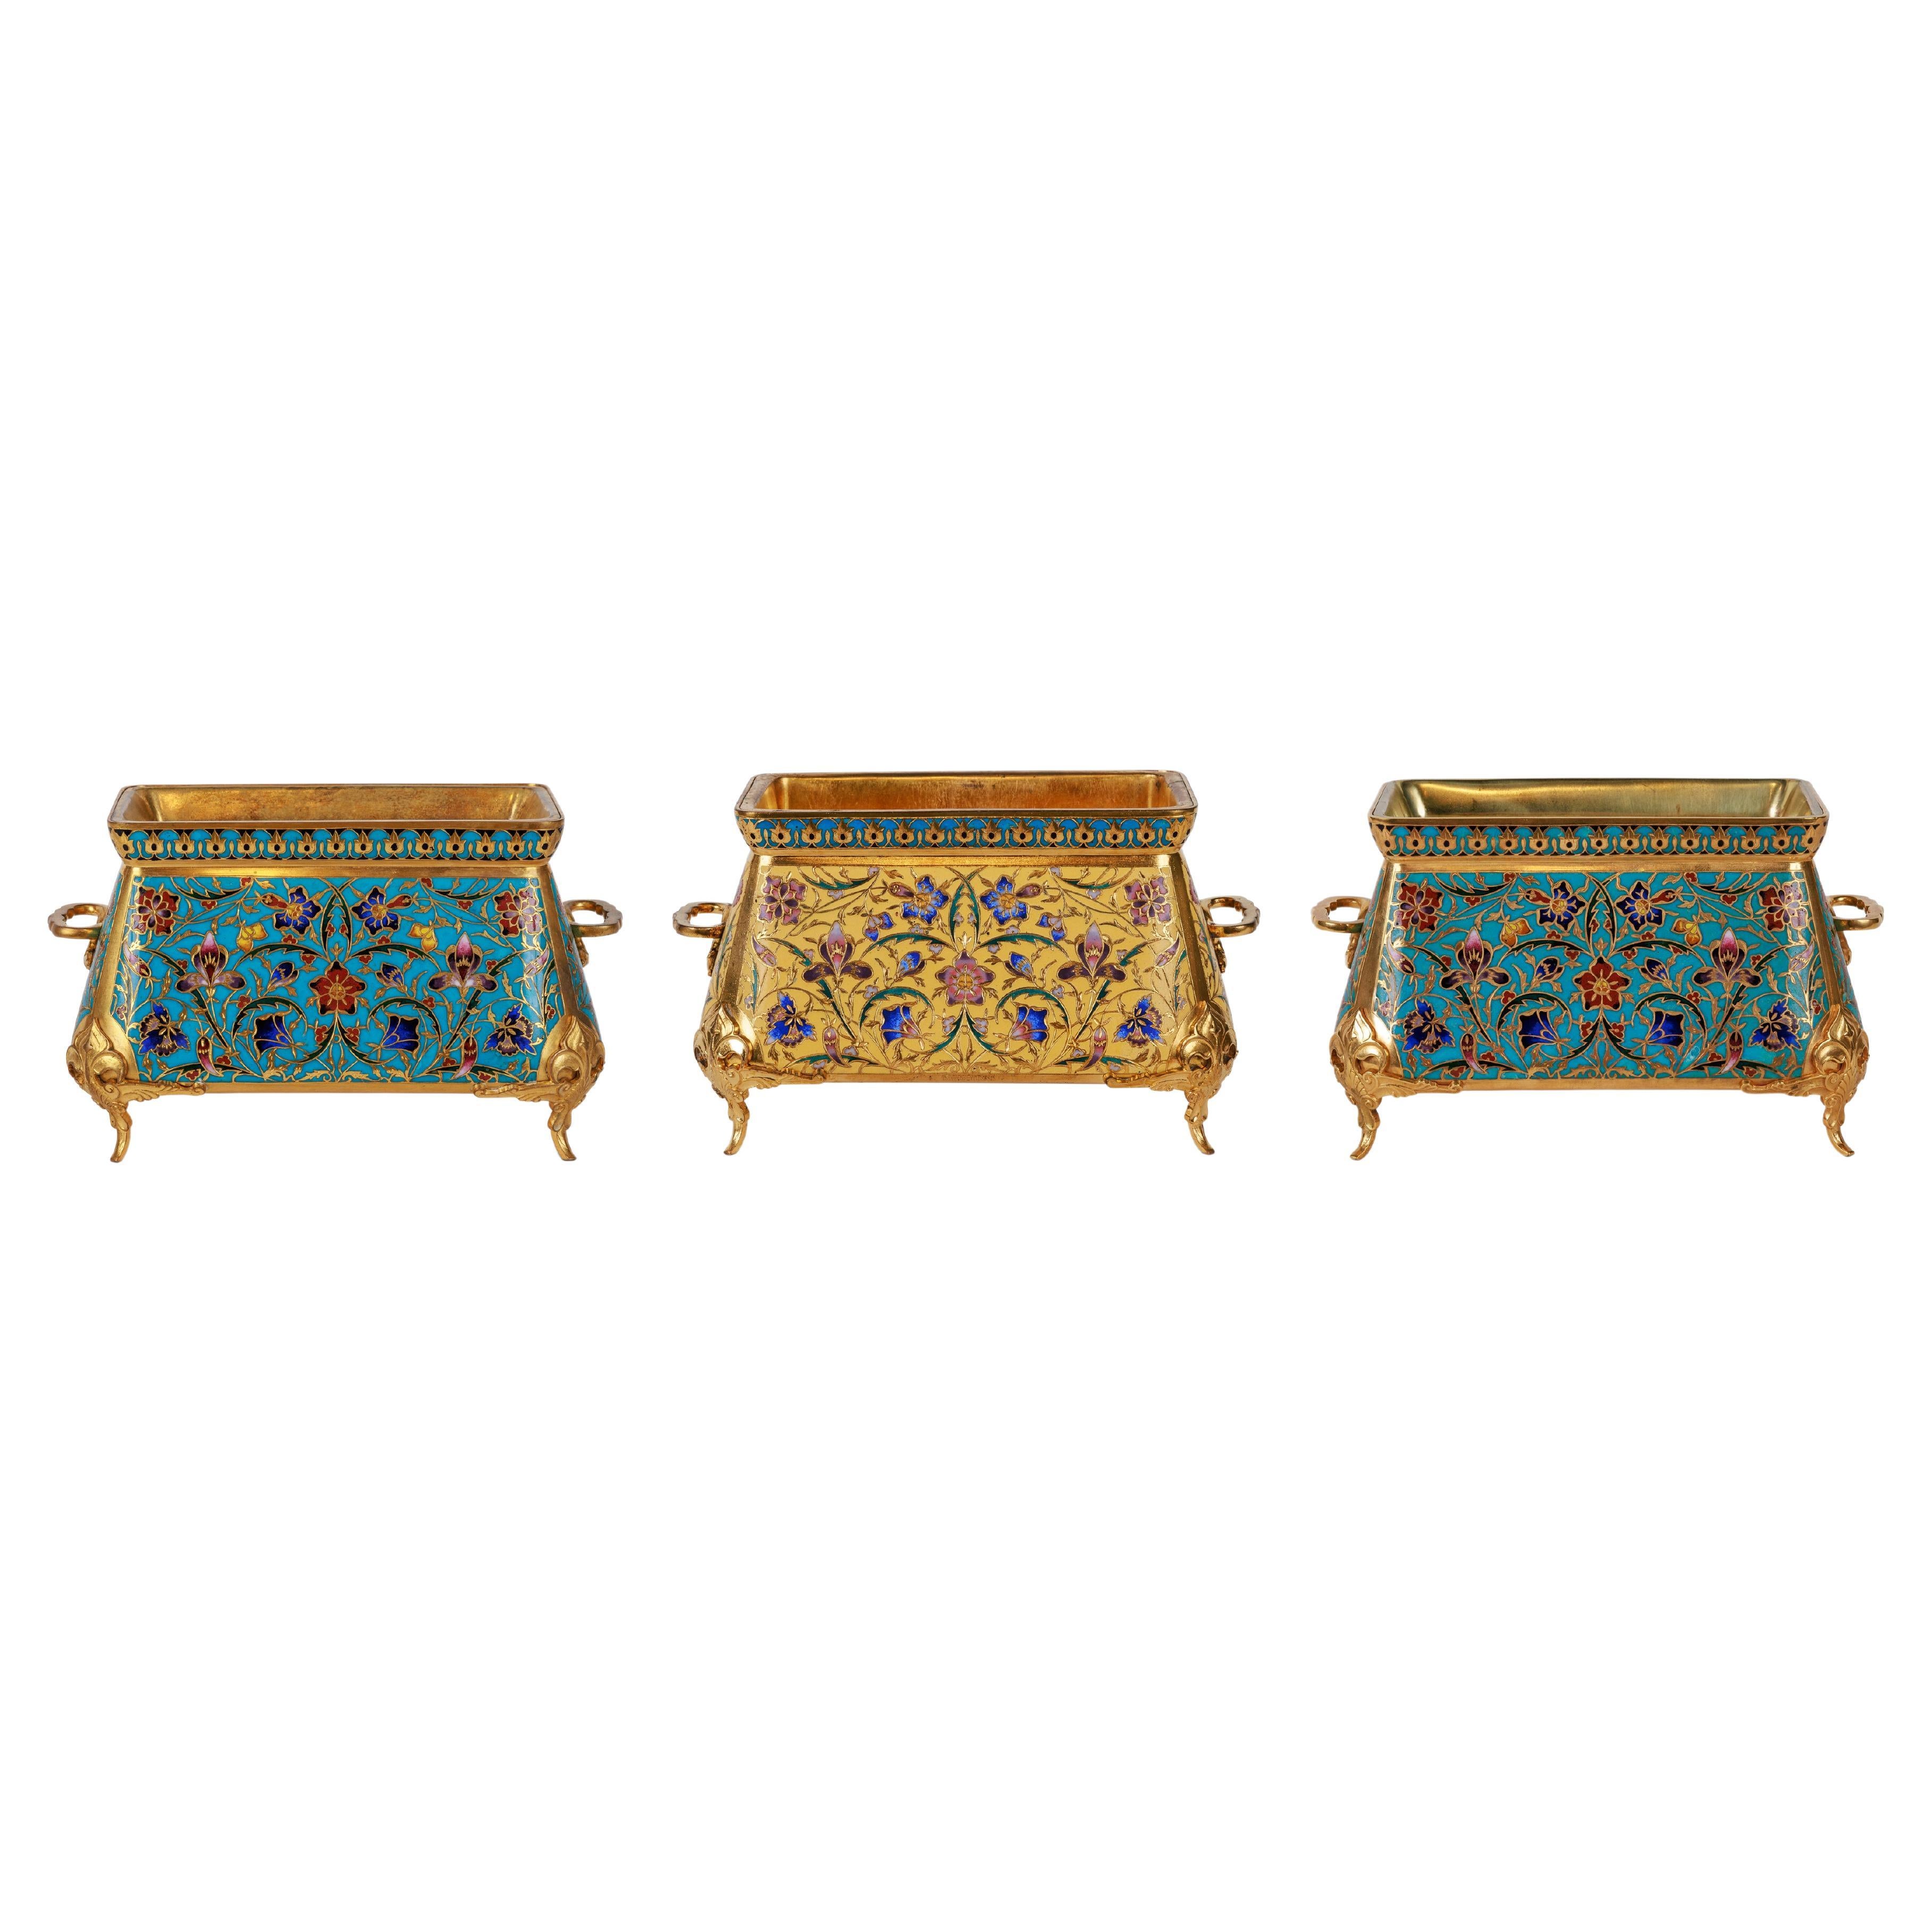 F. Barbedienne, A Suite of Three French Ormolu and Champleve Enamel Jardinieres 